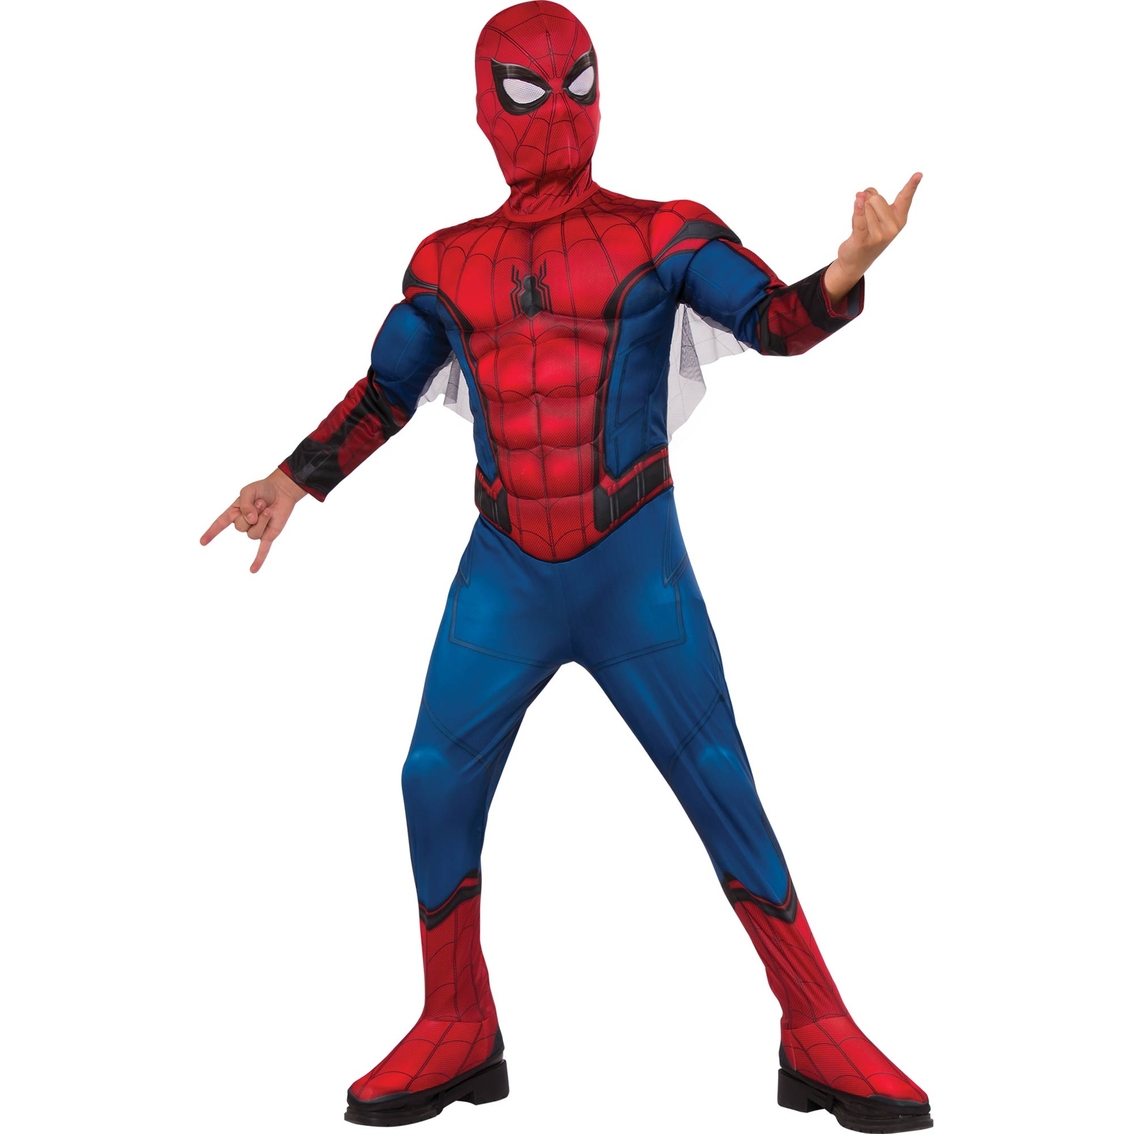 Spider-man Padded Child Small | Children's Costumes | Clothing ...